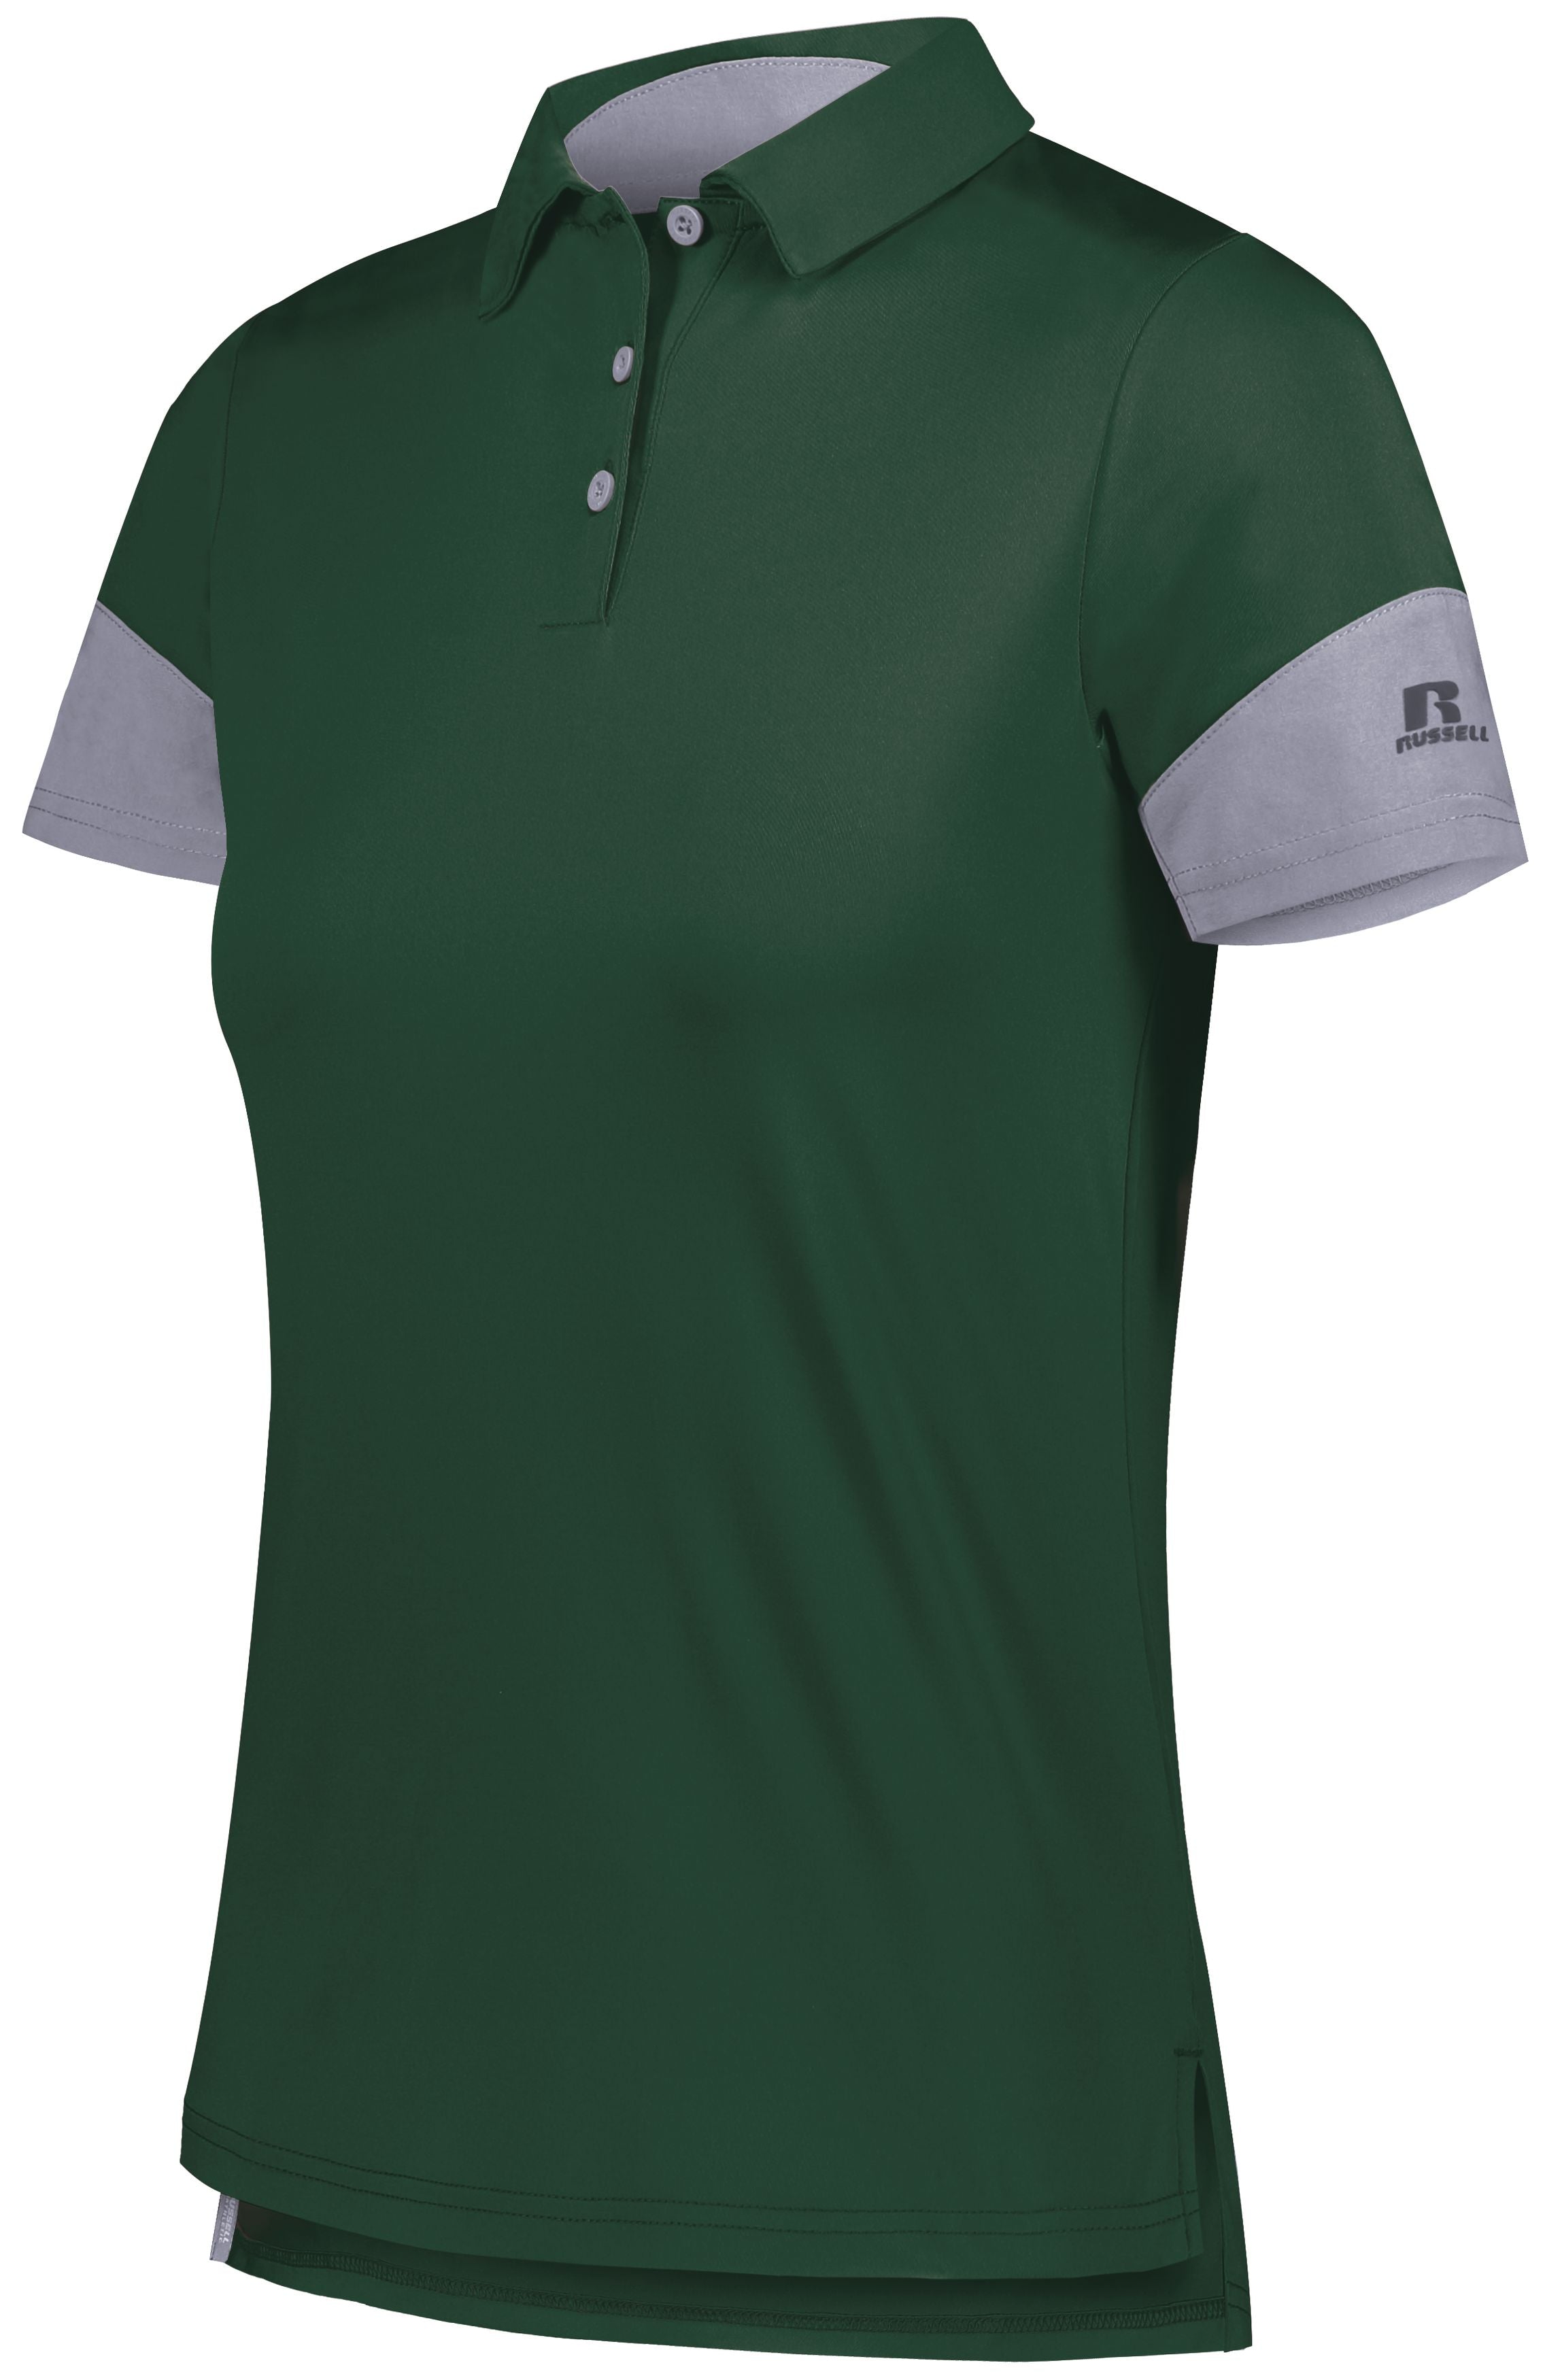 Russell Athletic Ladies Hybrid Polo in Dark Green/Steel  -Part of the Ladies, Ladies-Polo, Polos, Russell-Athletic-Products, Shirts product lines at KanaleyCreations.com